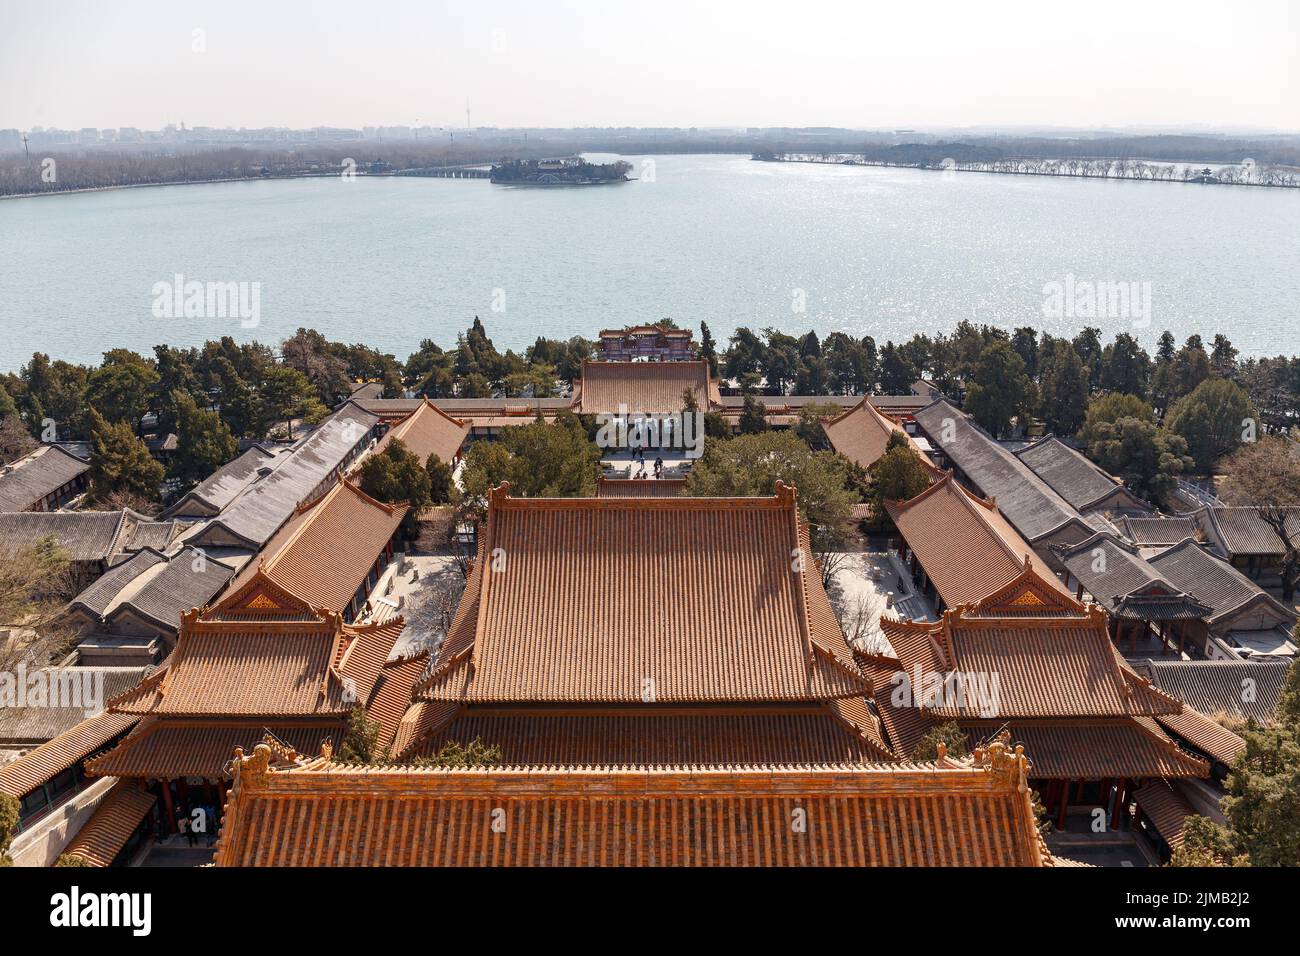 Monastery complex above the lake at the Summer Palace in Beijing, China on March 15, 2018. Stock Photo